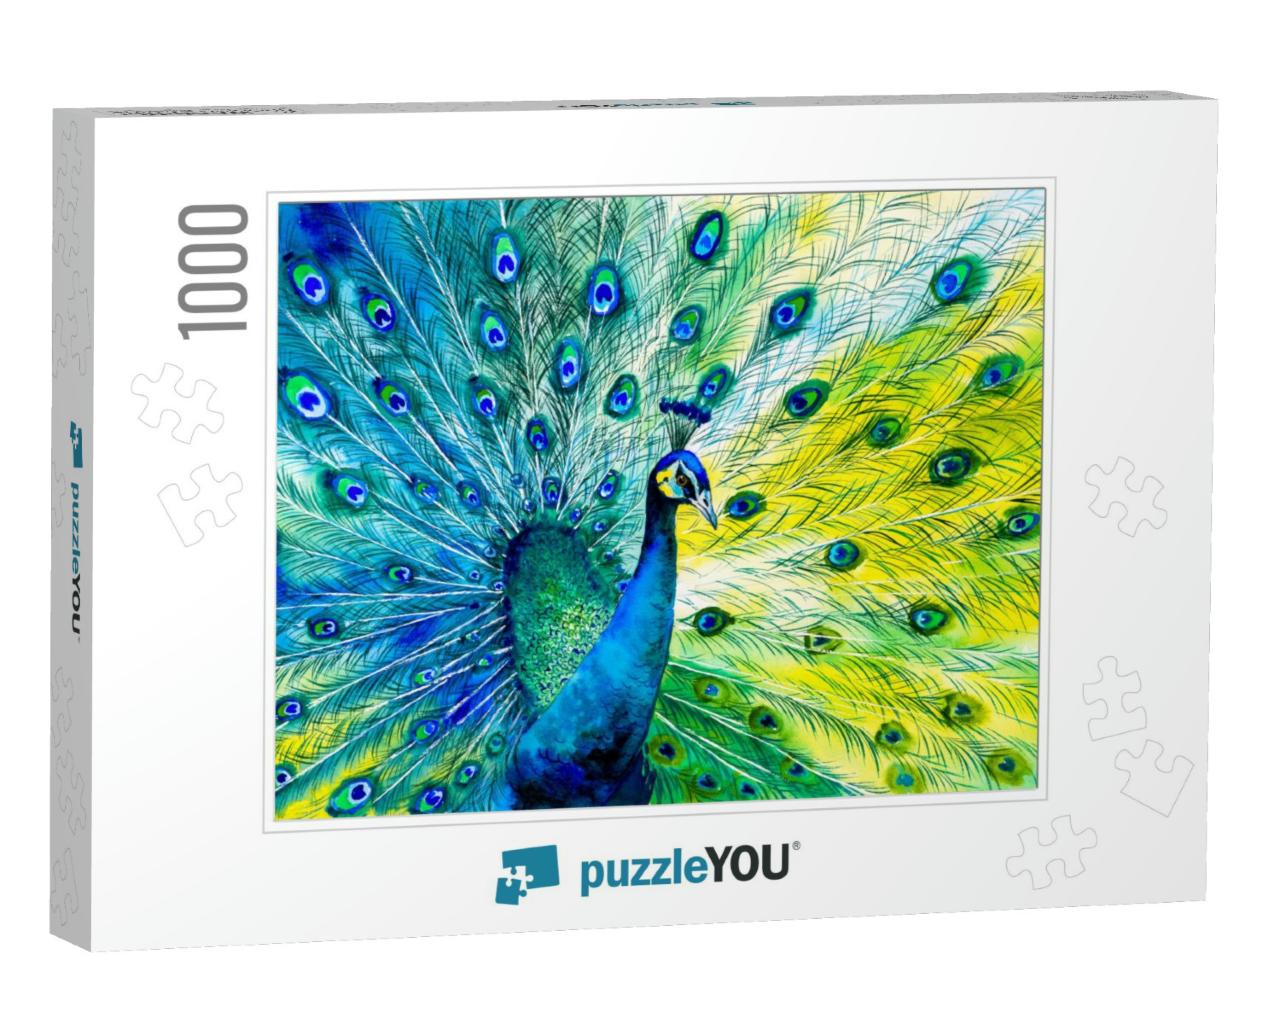 Watercolor Painting - Colorful Peacock Tail Feathers... Jigsaw Puzzle with 1000 pieces